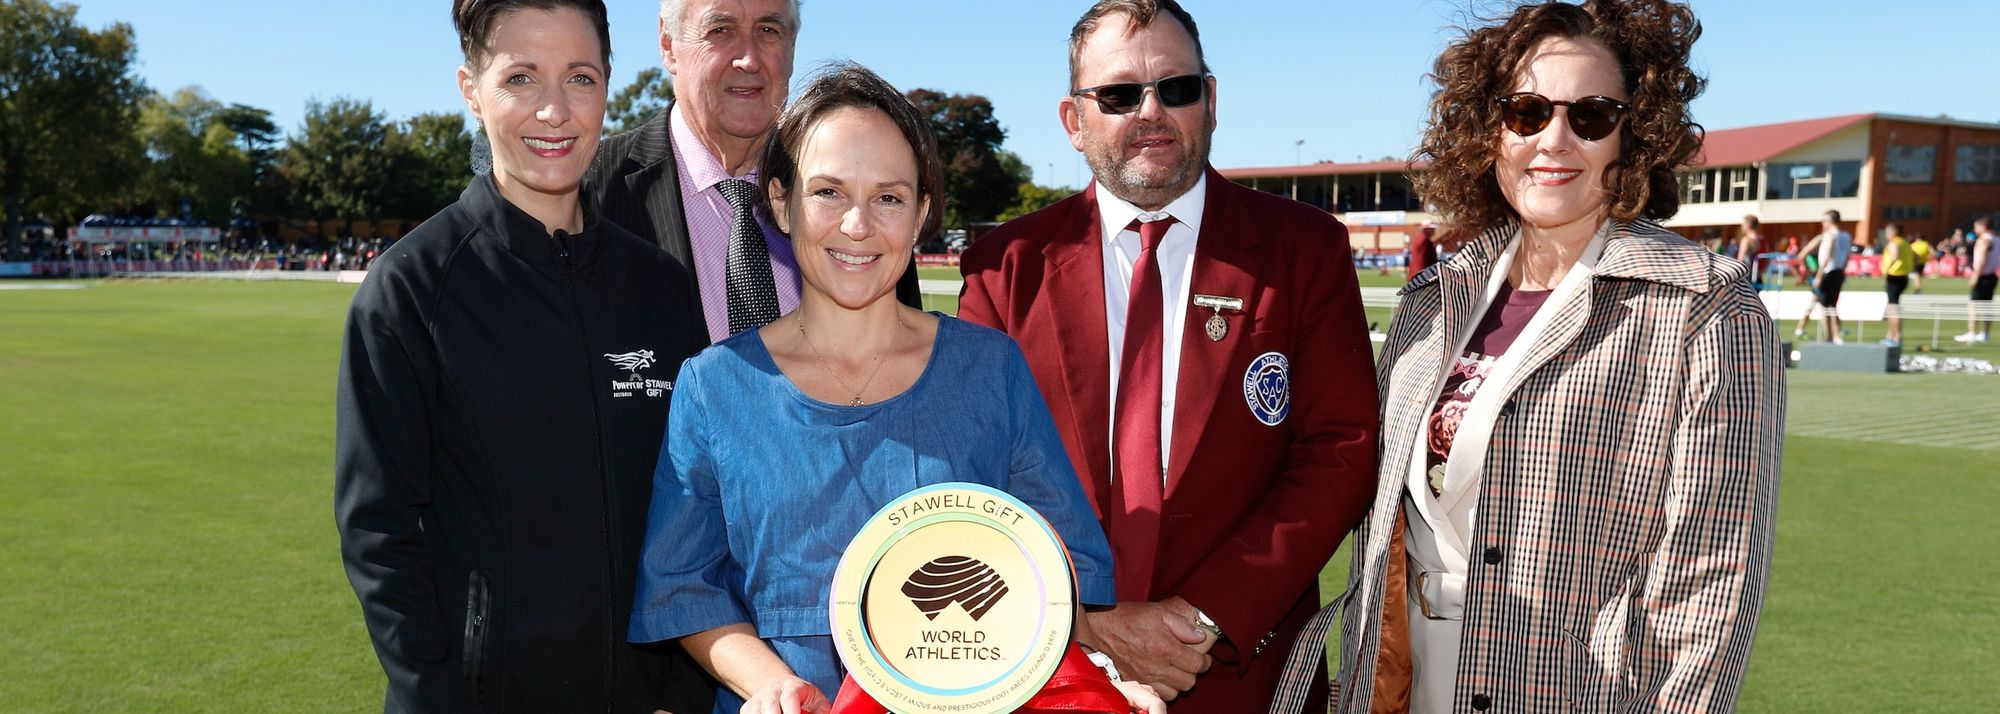 At the 139th Powercor Stawell Gift Carnival on Easter Monday (5), the World Athletics Heritage Plaque was unveiled jointly by The Hon. Jaala Pulford, Minister for Western Victoria, and Neil Blizzard, president of Stawell Athletic Club.